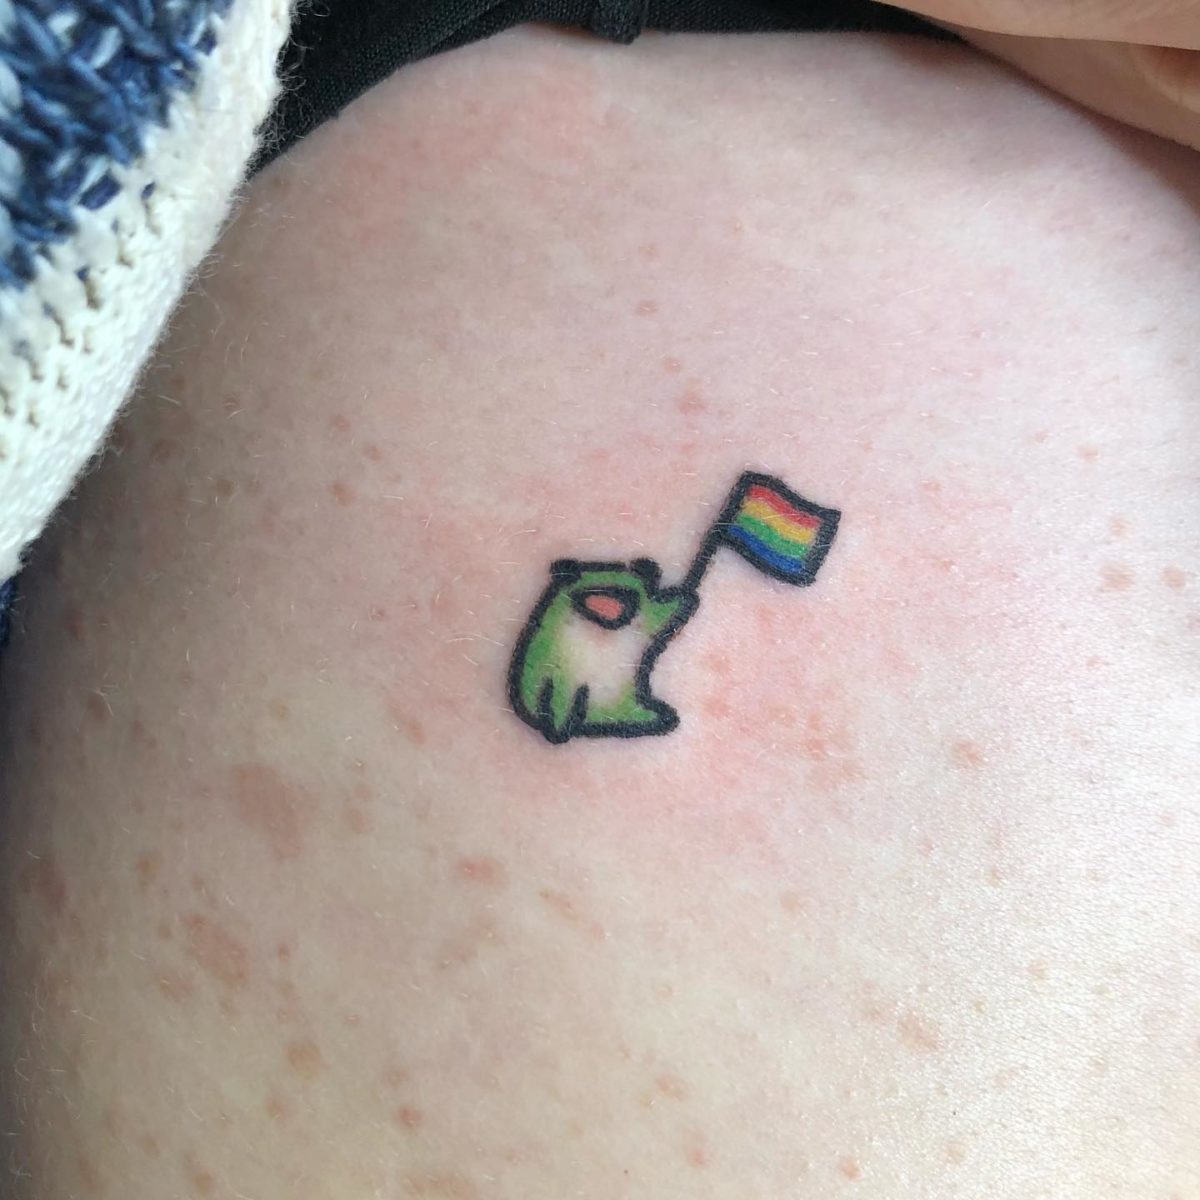 loud and proud lgbt tattoo ideas | show your pride with an lgbt tattoo that celebrates love.